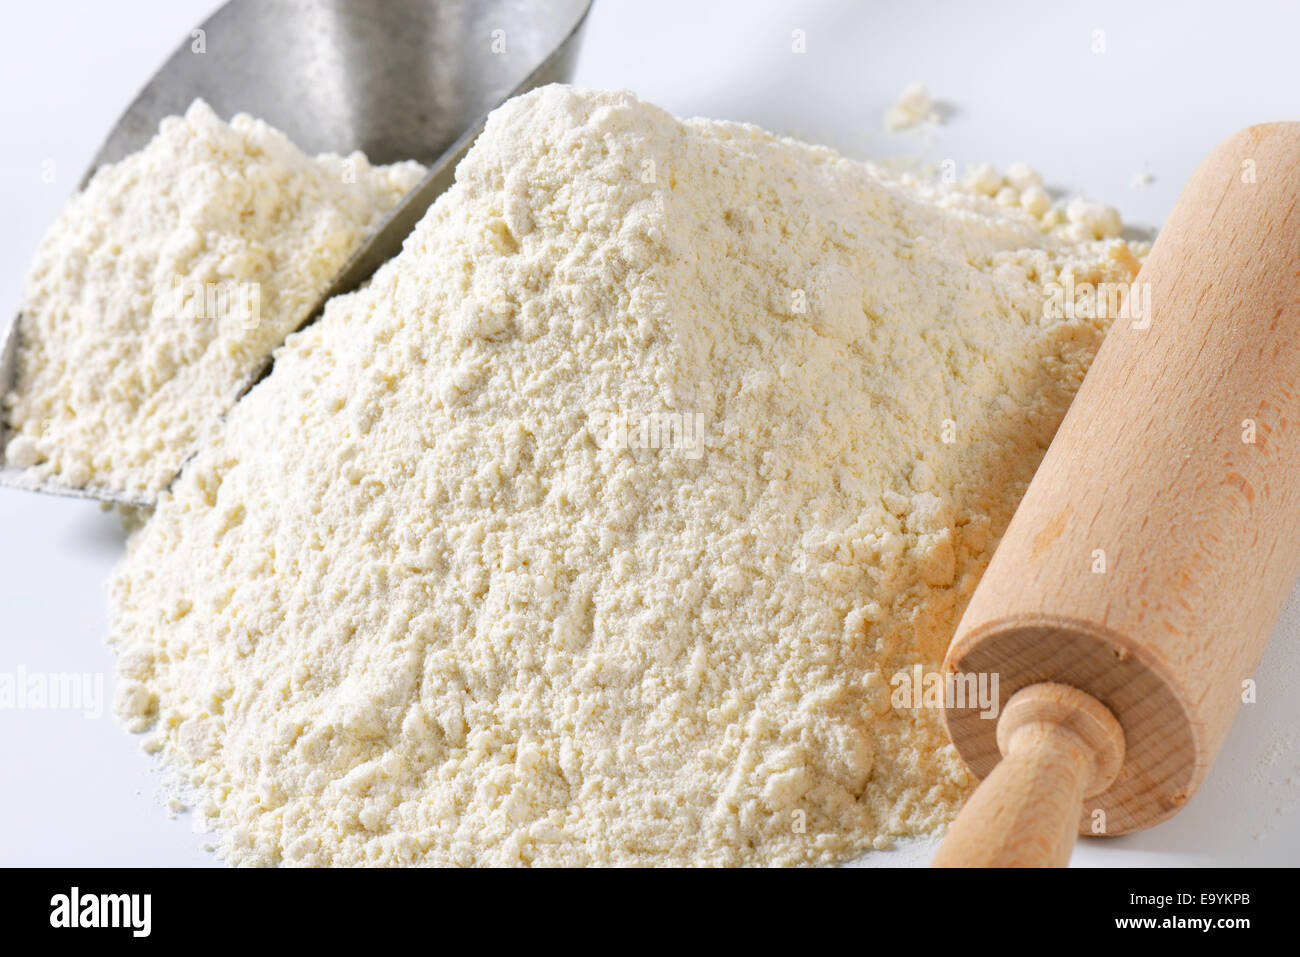 Pile of finely ground flour, wood rolling pin and metal scoop Stock Photo